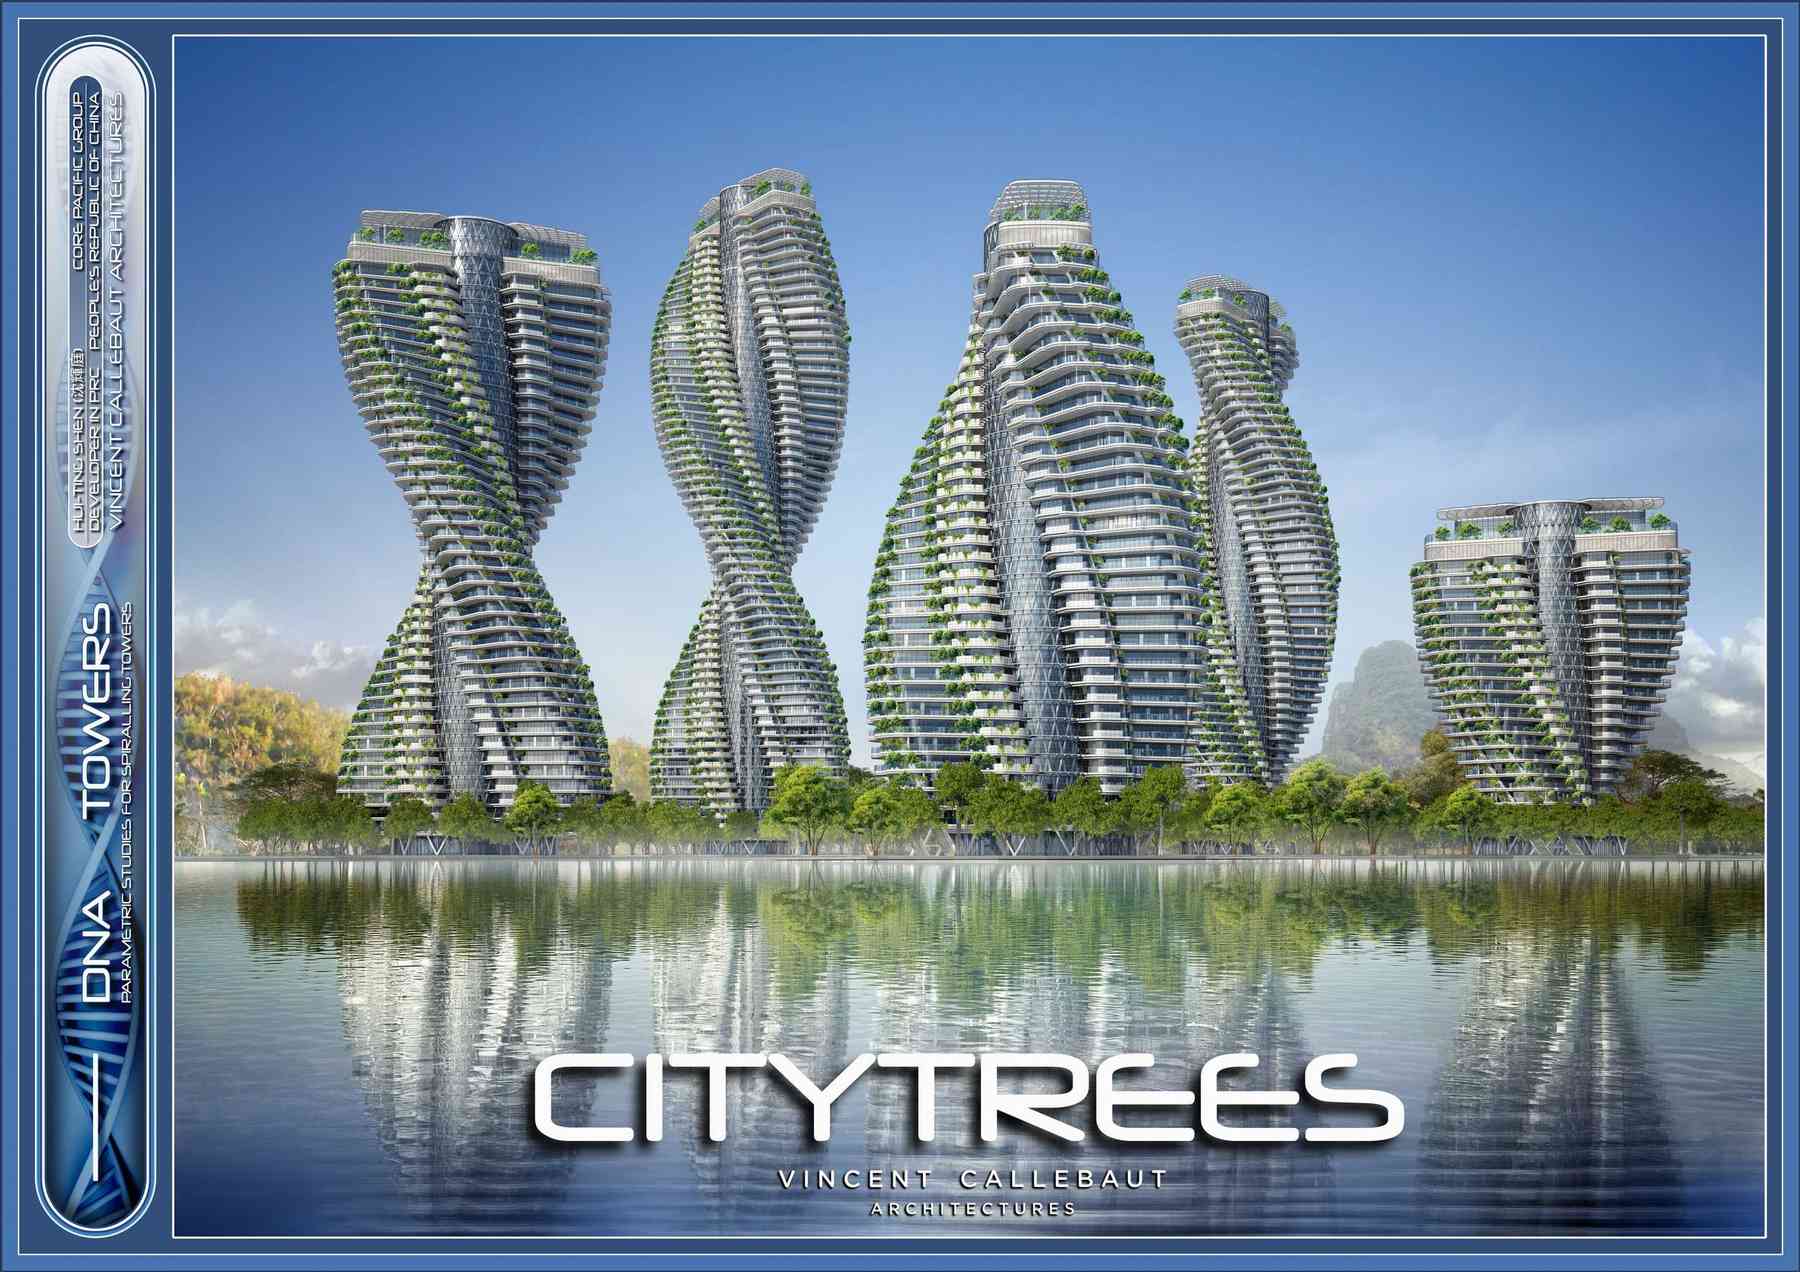 141010_citytrees-citytrees_pl001